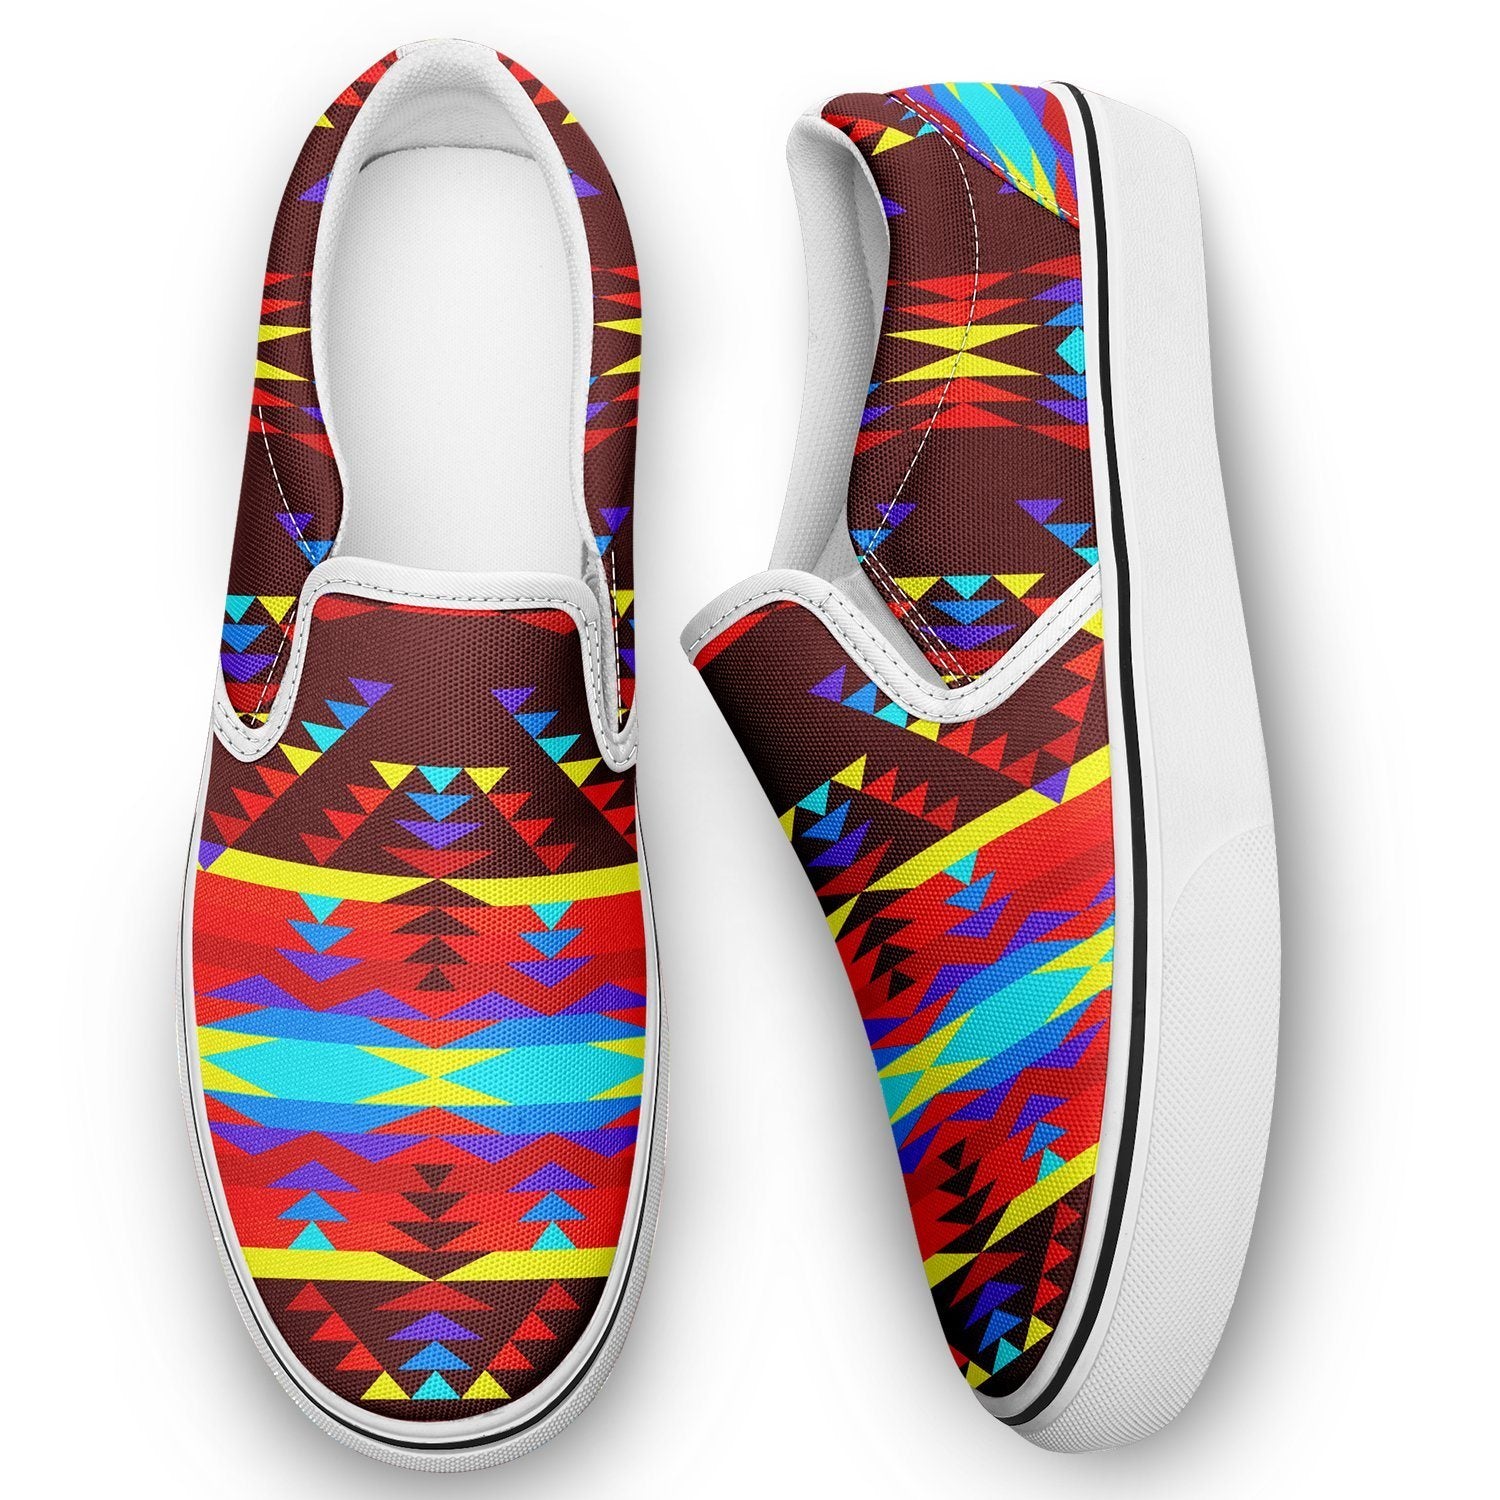 Visions of Lasting Peace Otoyimm Kid's Canvas Slip On Shoes 49 Dzine 